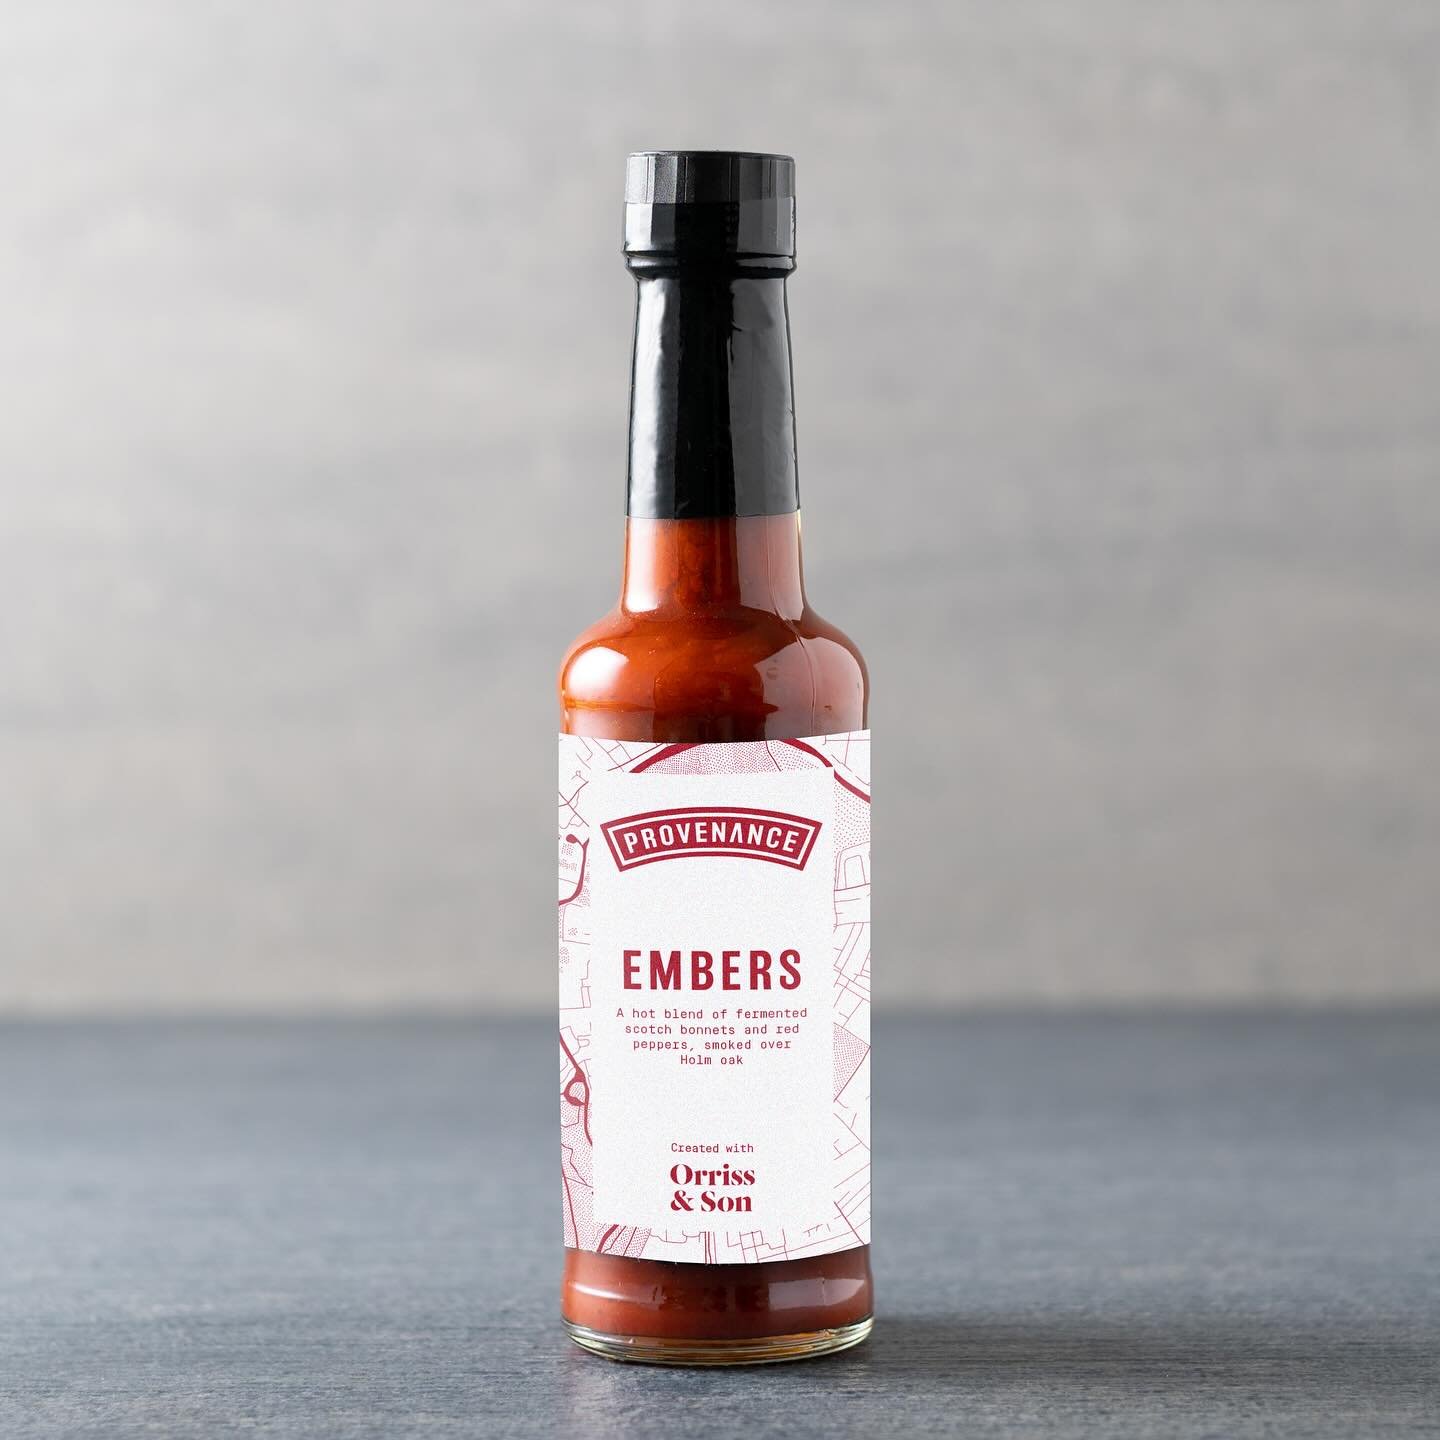 A vibrant, hot blend of fermented chillies &amp; red peppers. Perfectly smooth, Embers has a pronounced scotch bonnet heat and delicate natural smoke that marry wonderfully in this Great Taste ⭐️ winning sauce! 

Produced in collaboration with @prove